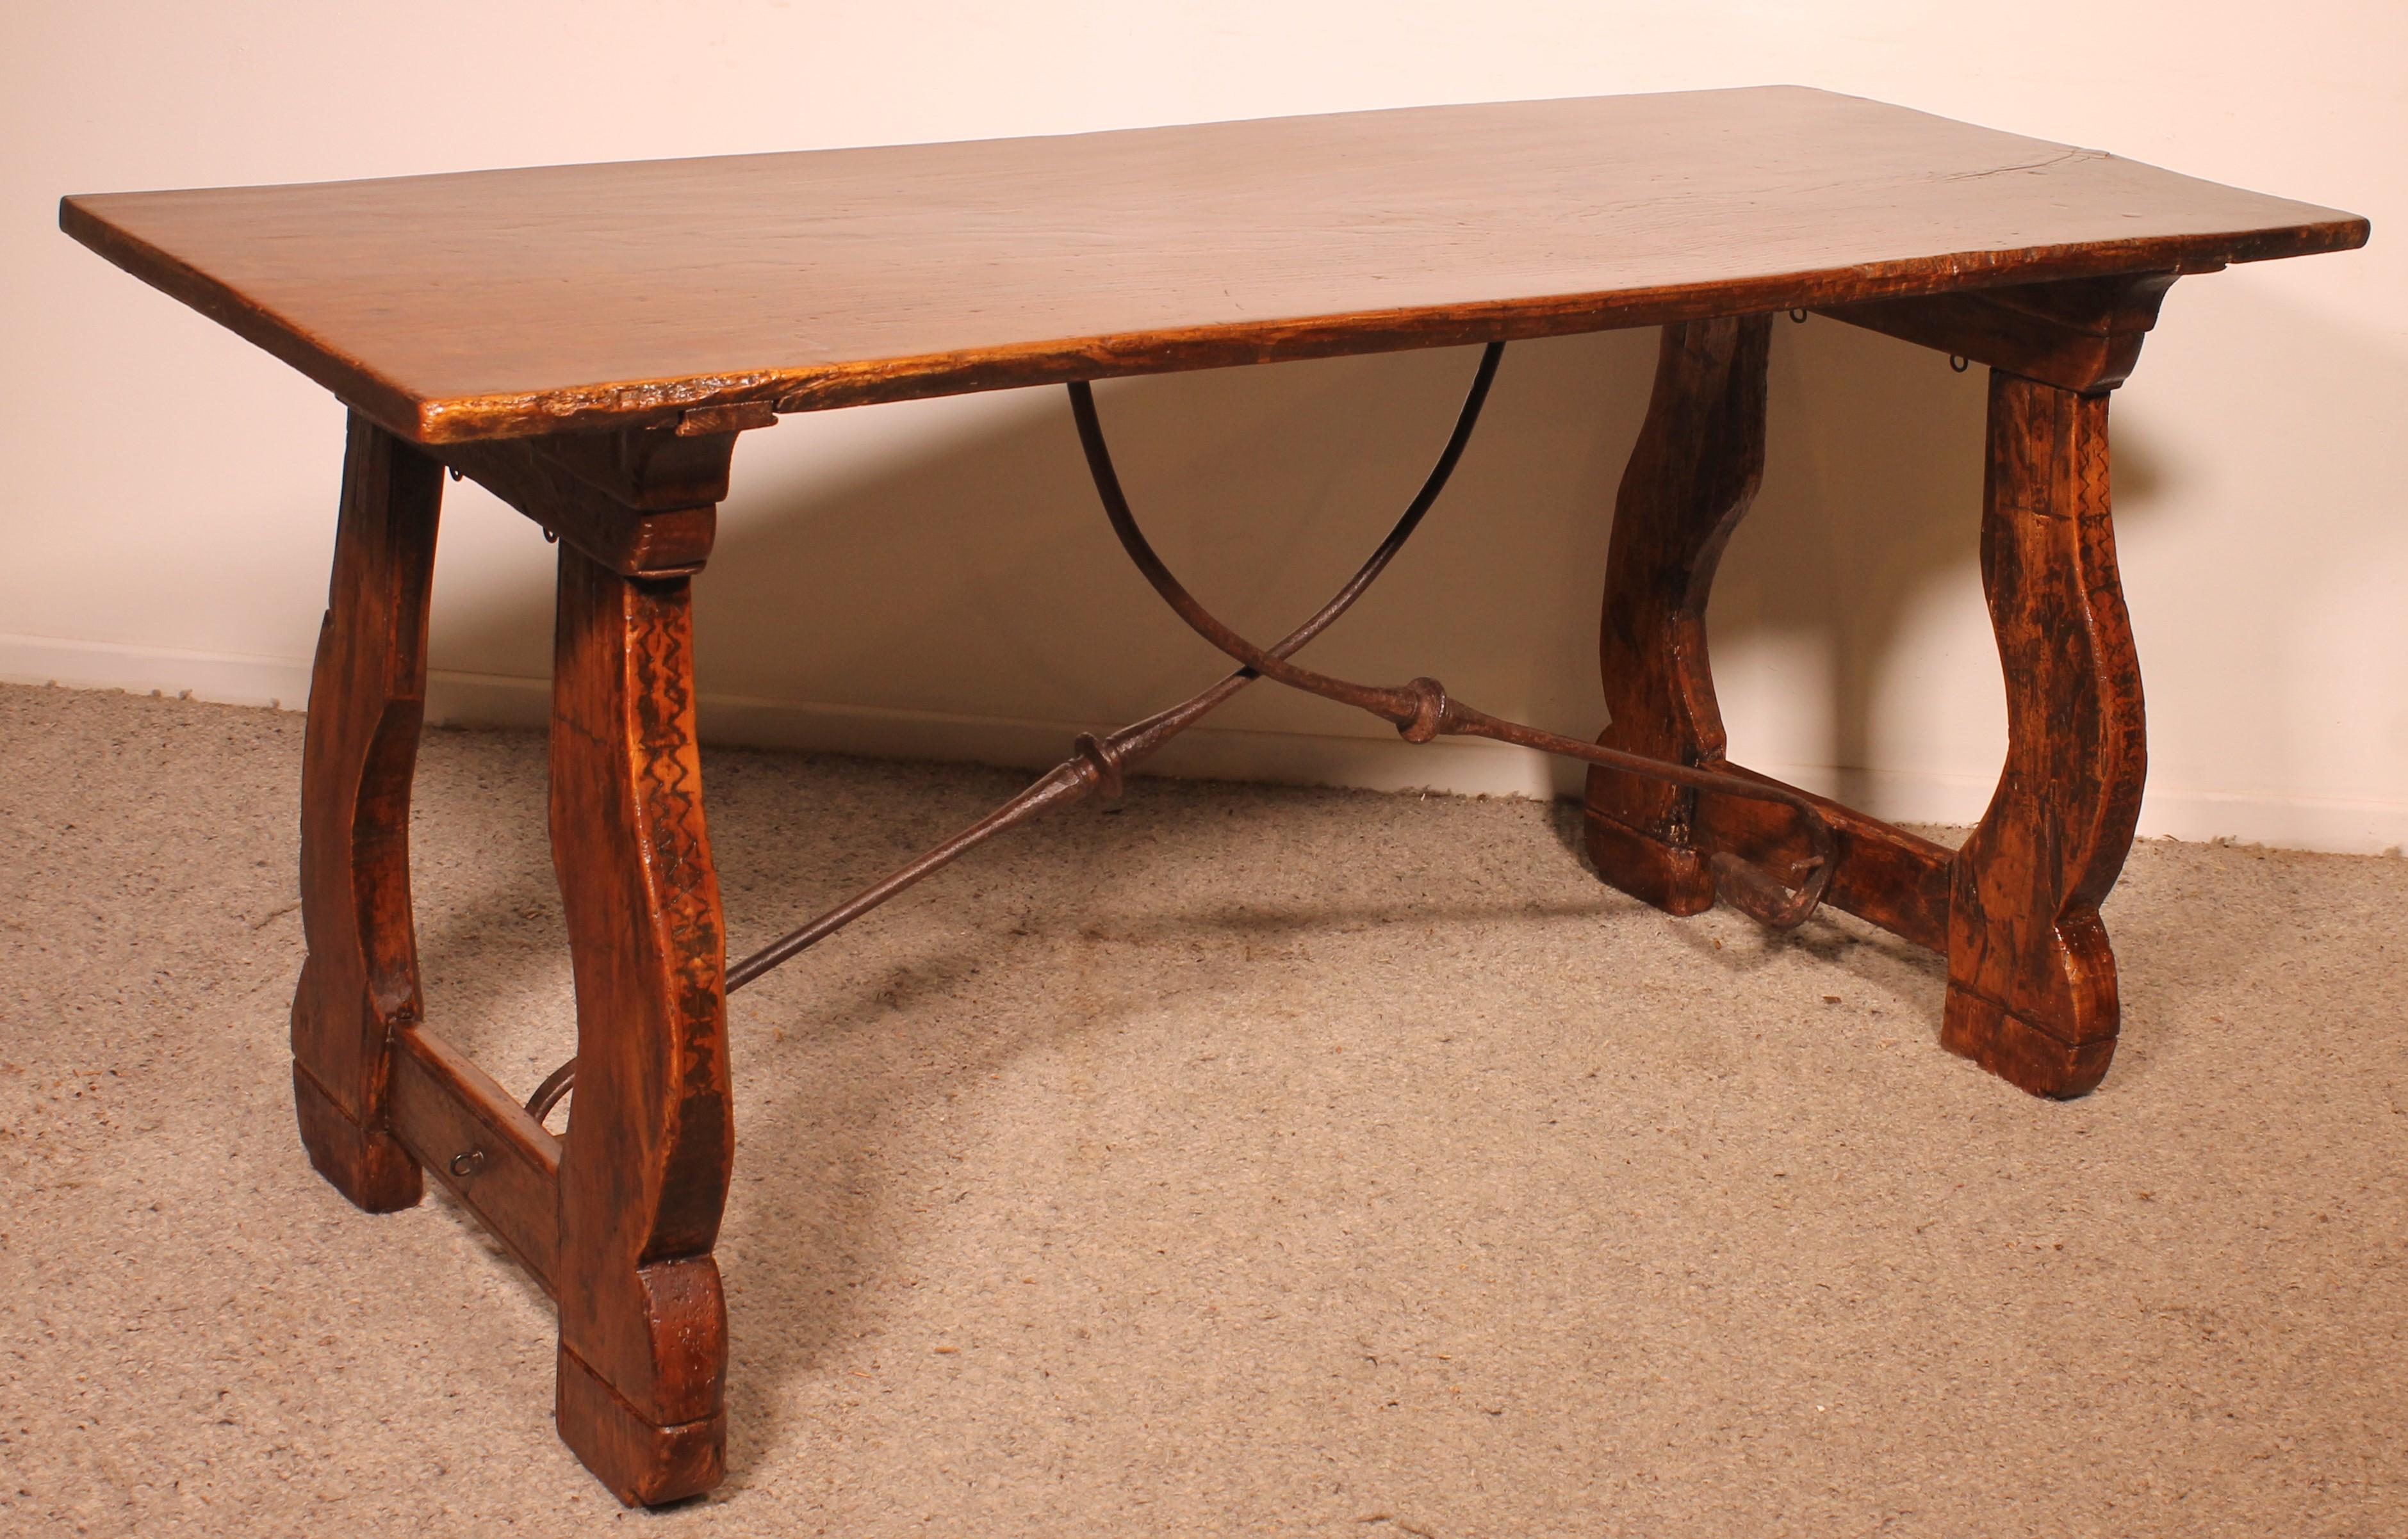 Spanish Table From The 17th Century 1